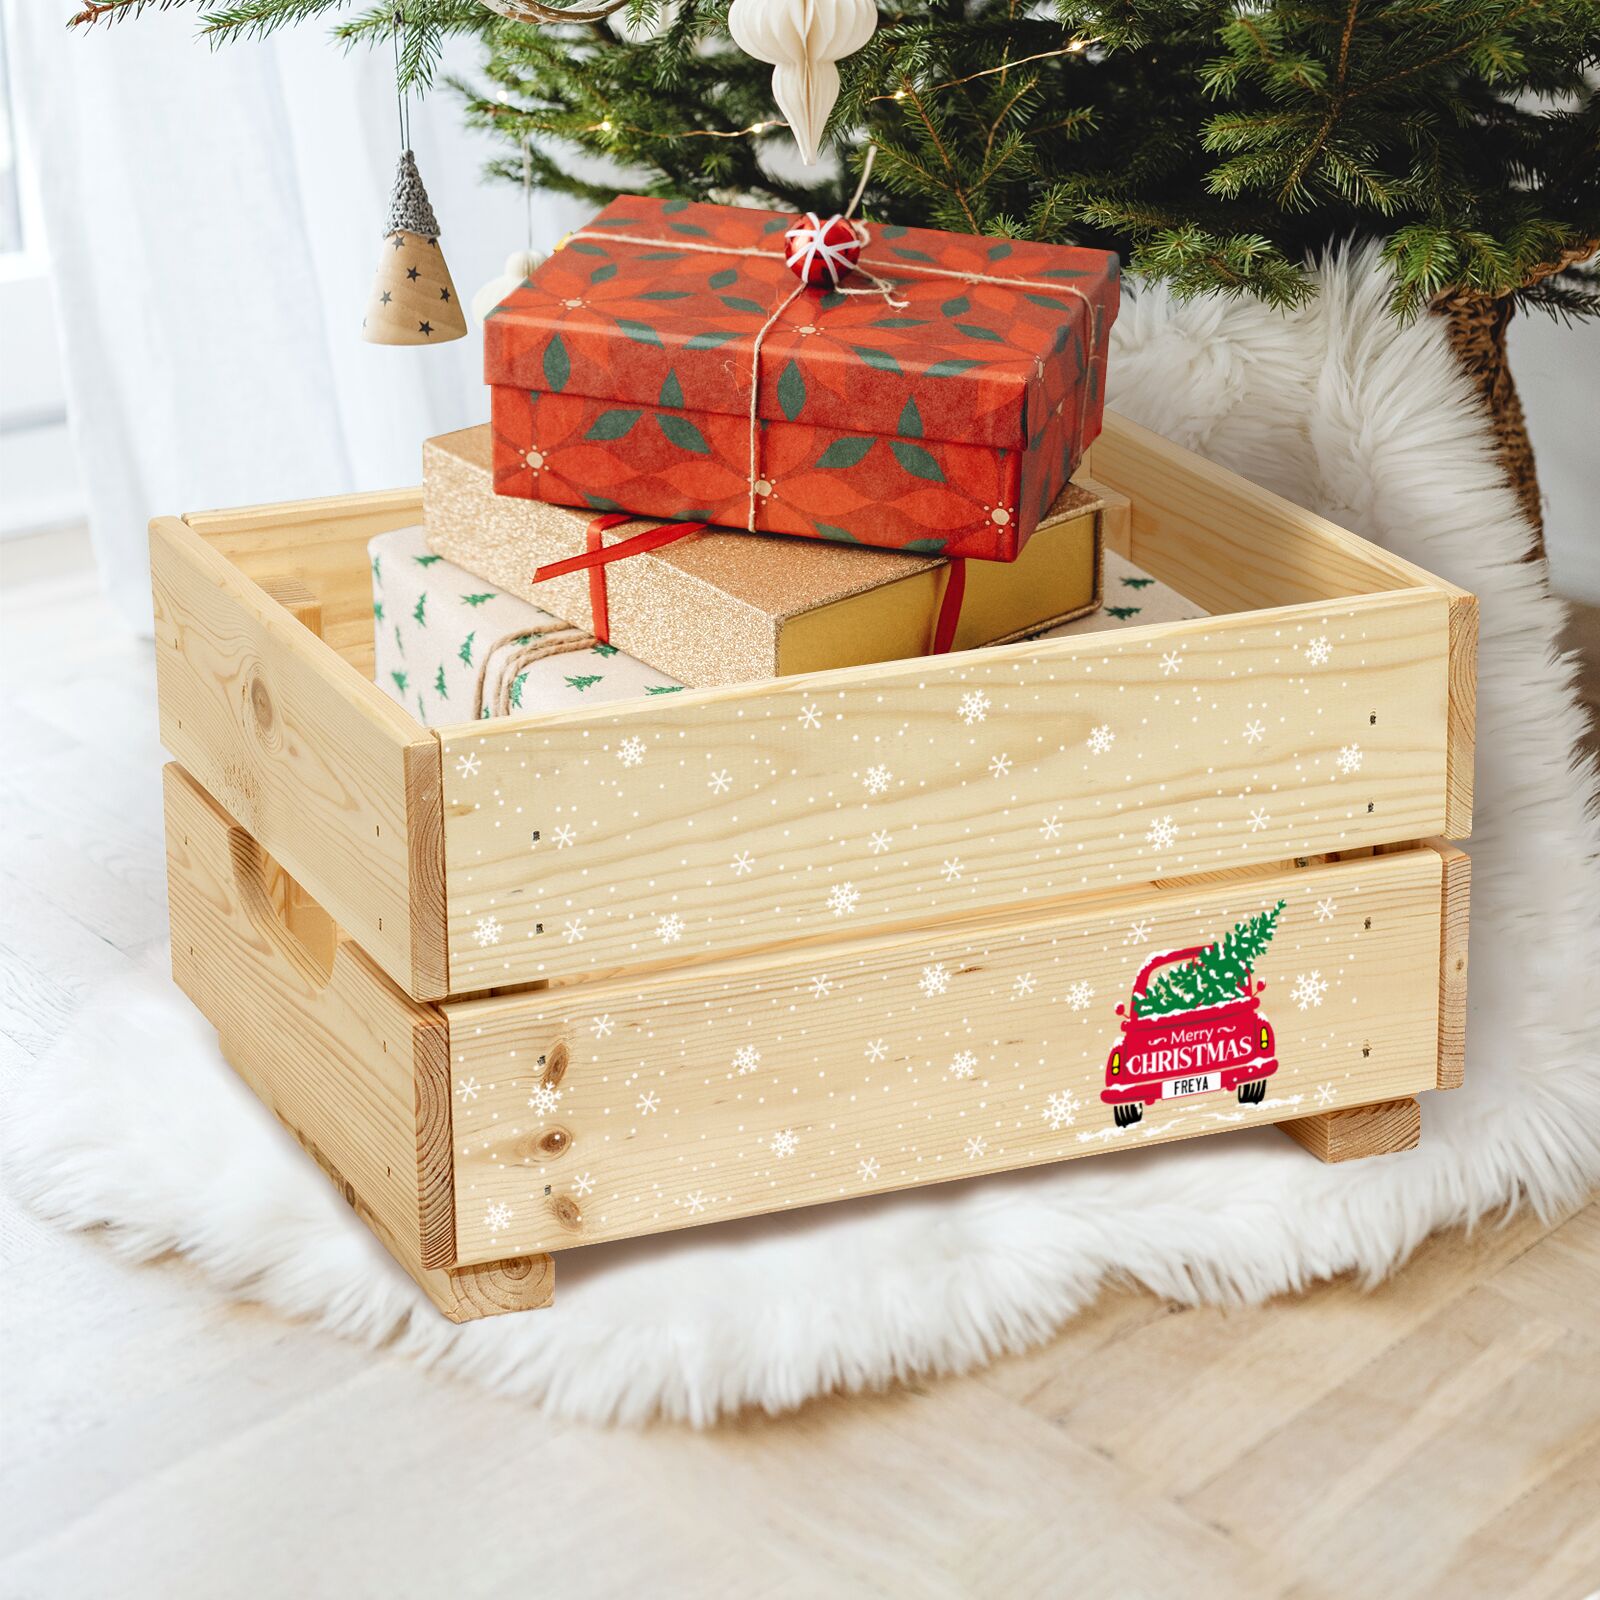 Personalised Driving Home For Christmas Christmas Eve Crate Box in Cosy room